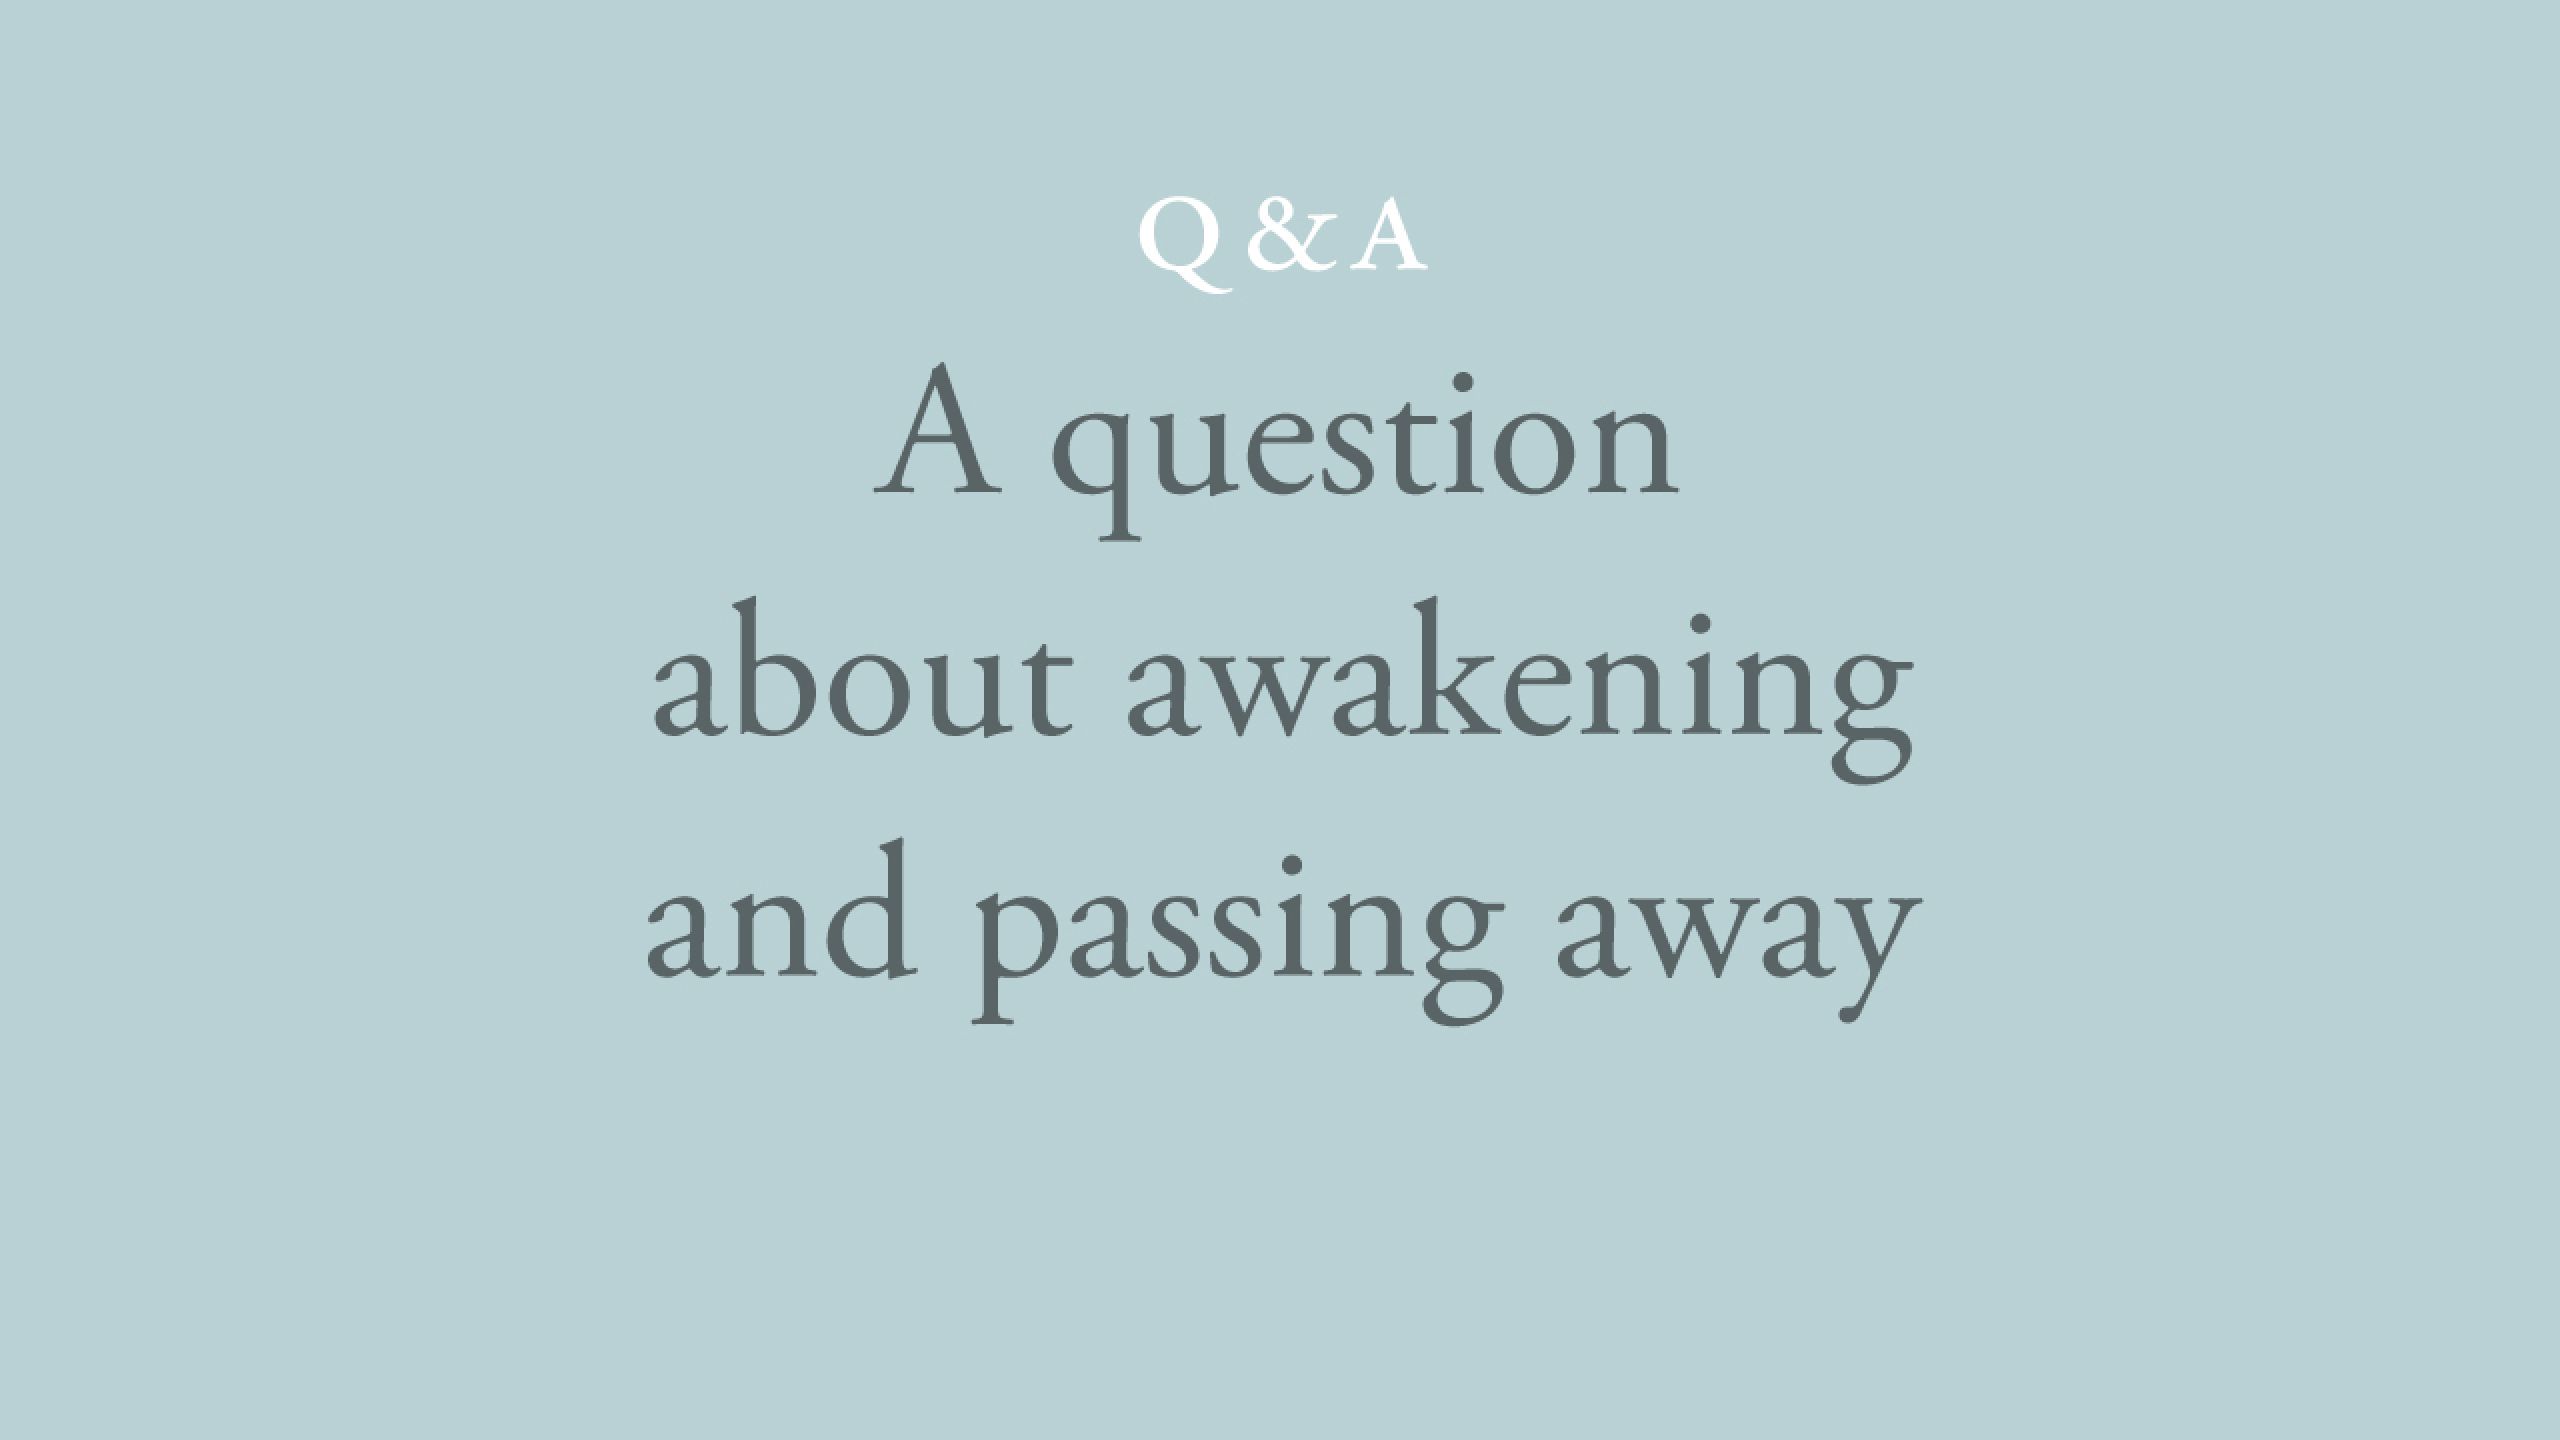 Do those who awaken have a different experience of passing away?